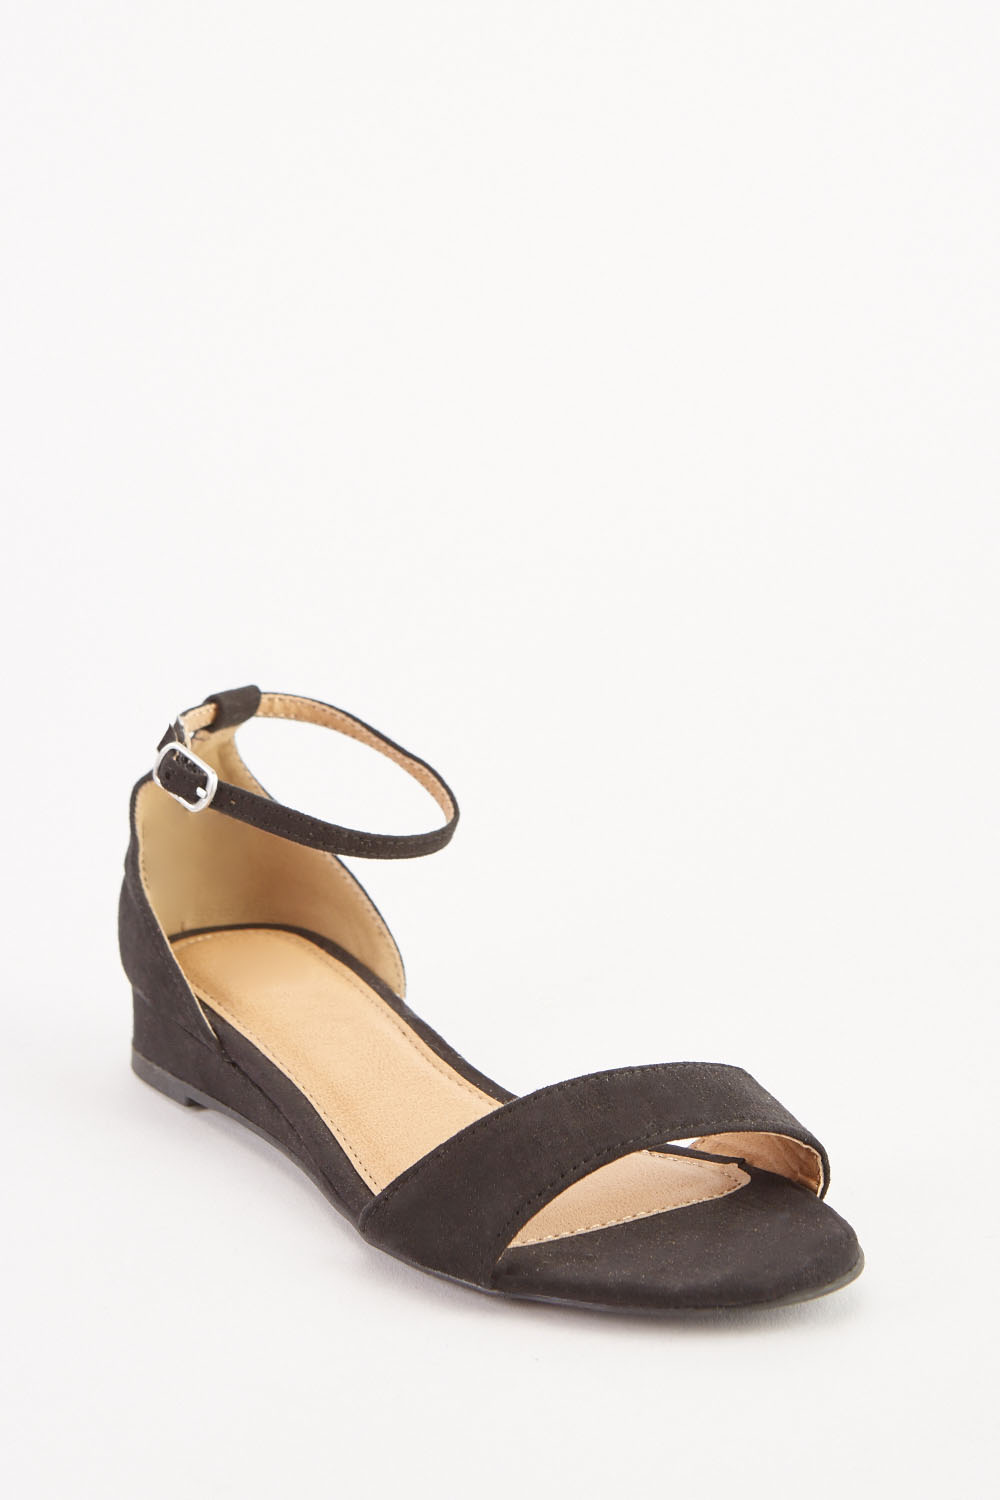 Low Wedge Ankle Strap Sandals - Just $7